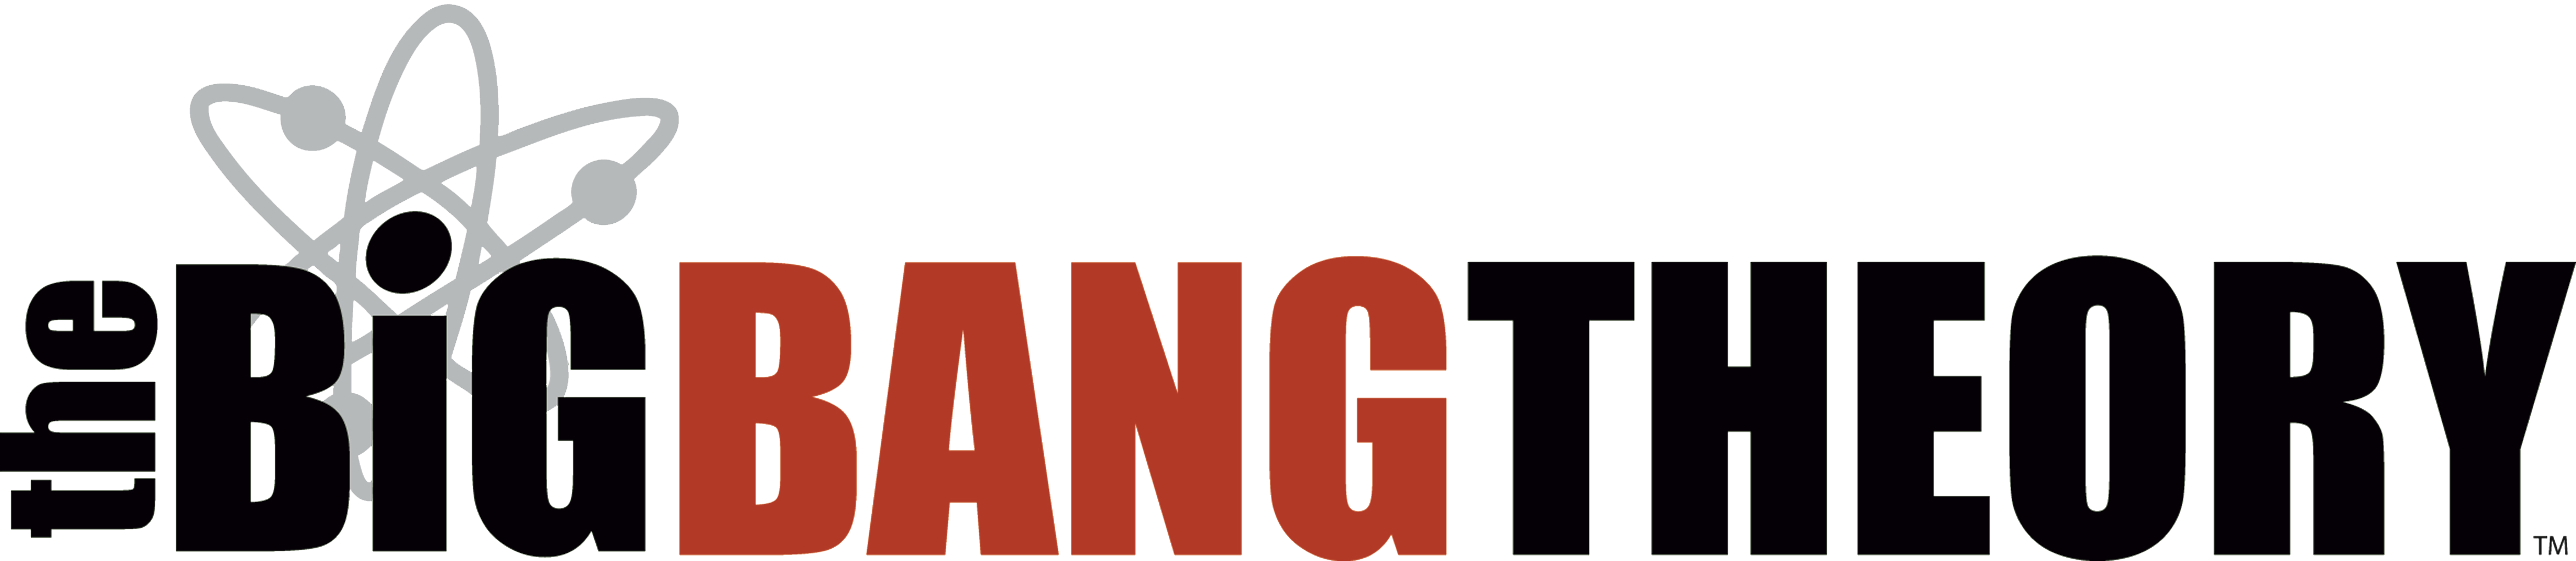 The Big Bang Theory PNG Images Transparent Free Download.